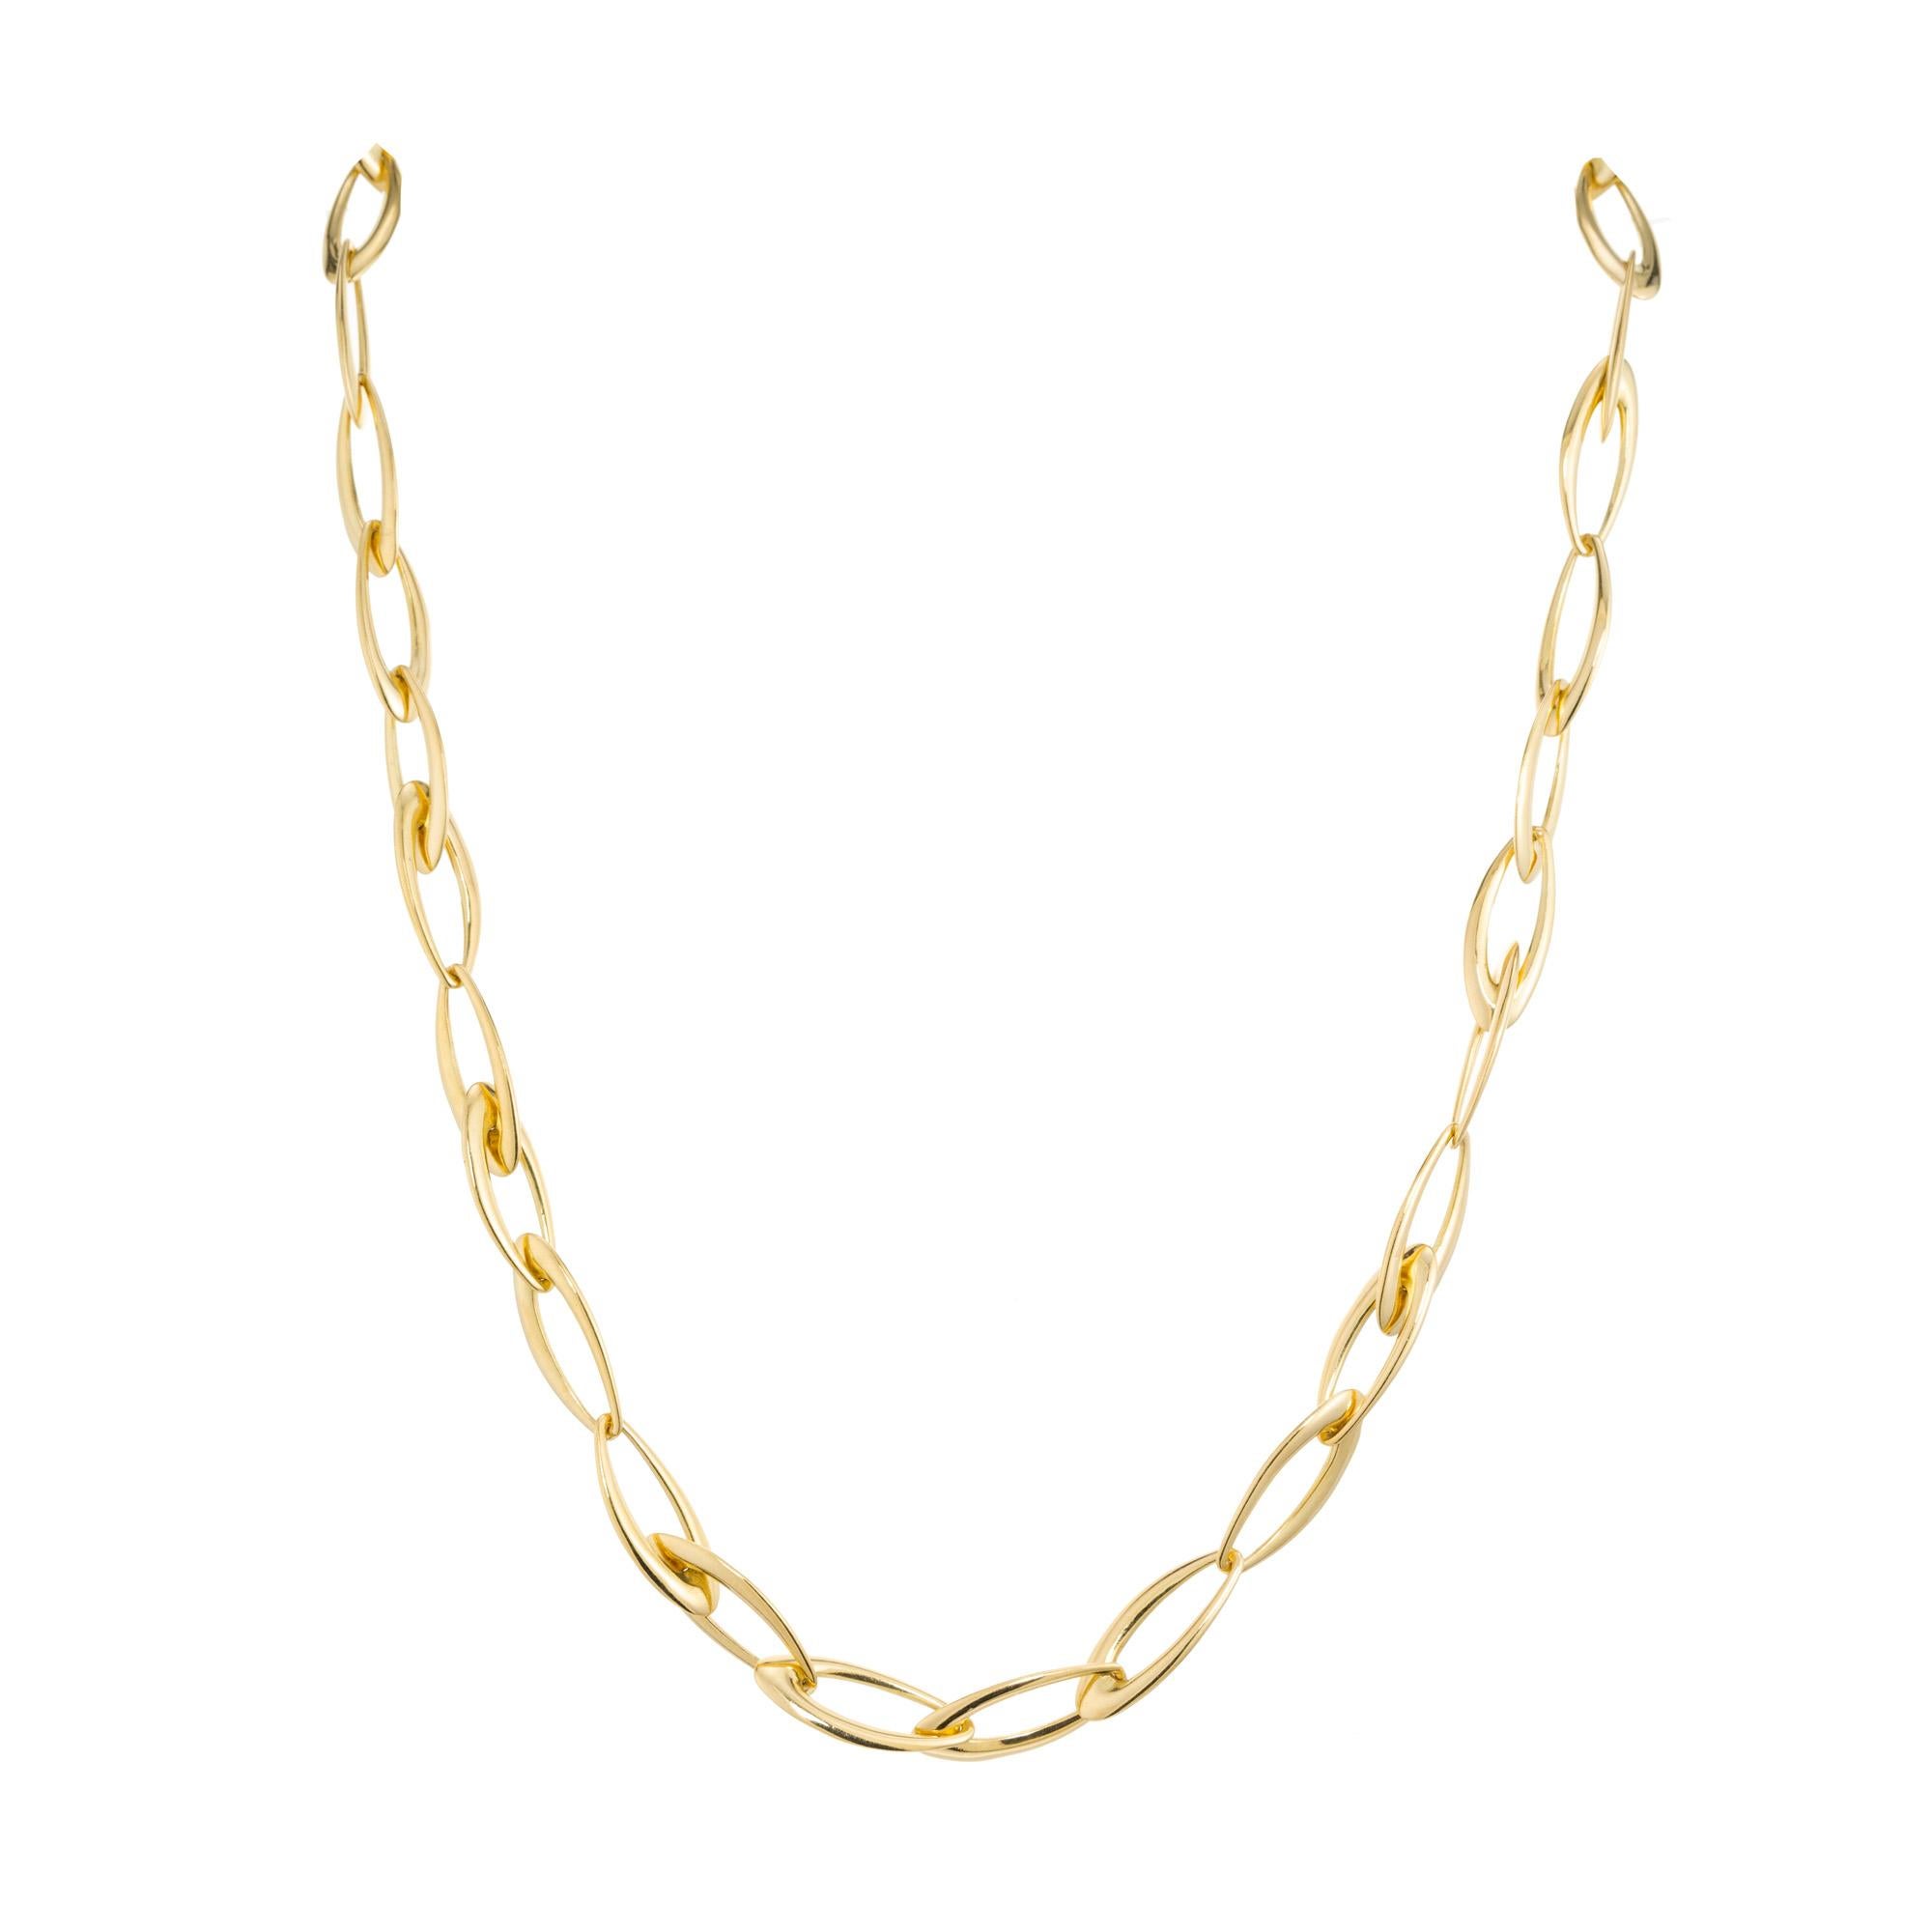 18k yellow gold fancy oval link necklace. From Italian designer Superoro comes this 18 inch 18k yellow gold oval link necklace. The clasp is a continuation of oval links.

18k yellow gold 
34.9 grams
Hallmark: made in Italy
Total length: 18